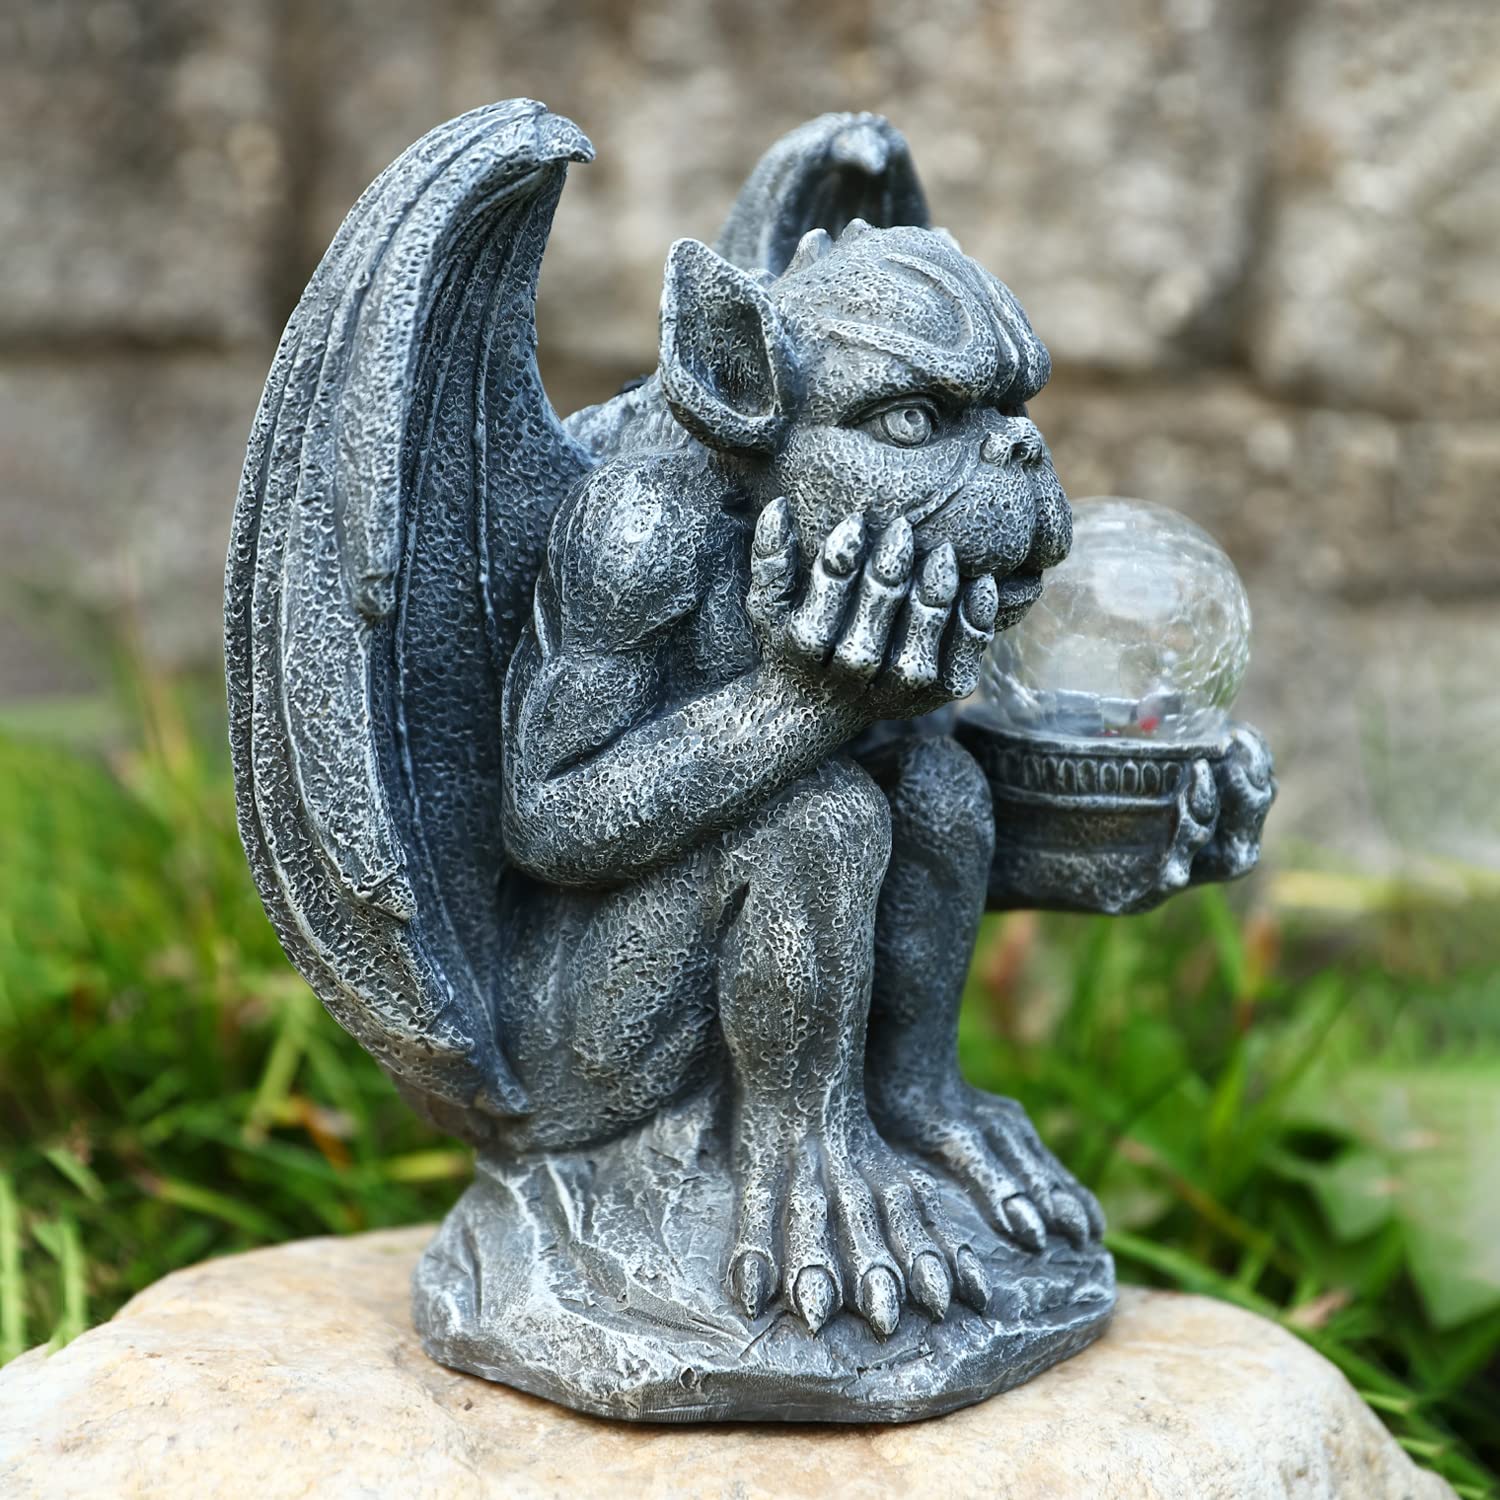 MIBUNG Large Gargoyle Statue Holding Magic Orb with Solar Lights Outdoor Decor, Gargoyle Monster Dragon Garden Guardian Gothic Creep Scary Sculpture, Patio Yard Lawn Decoration, Valentine's Day Gift